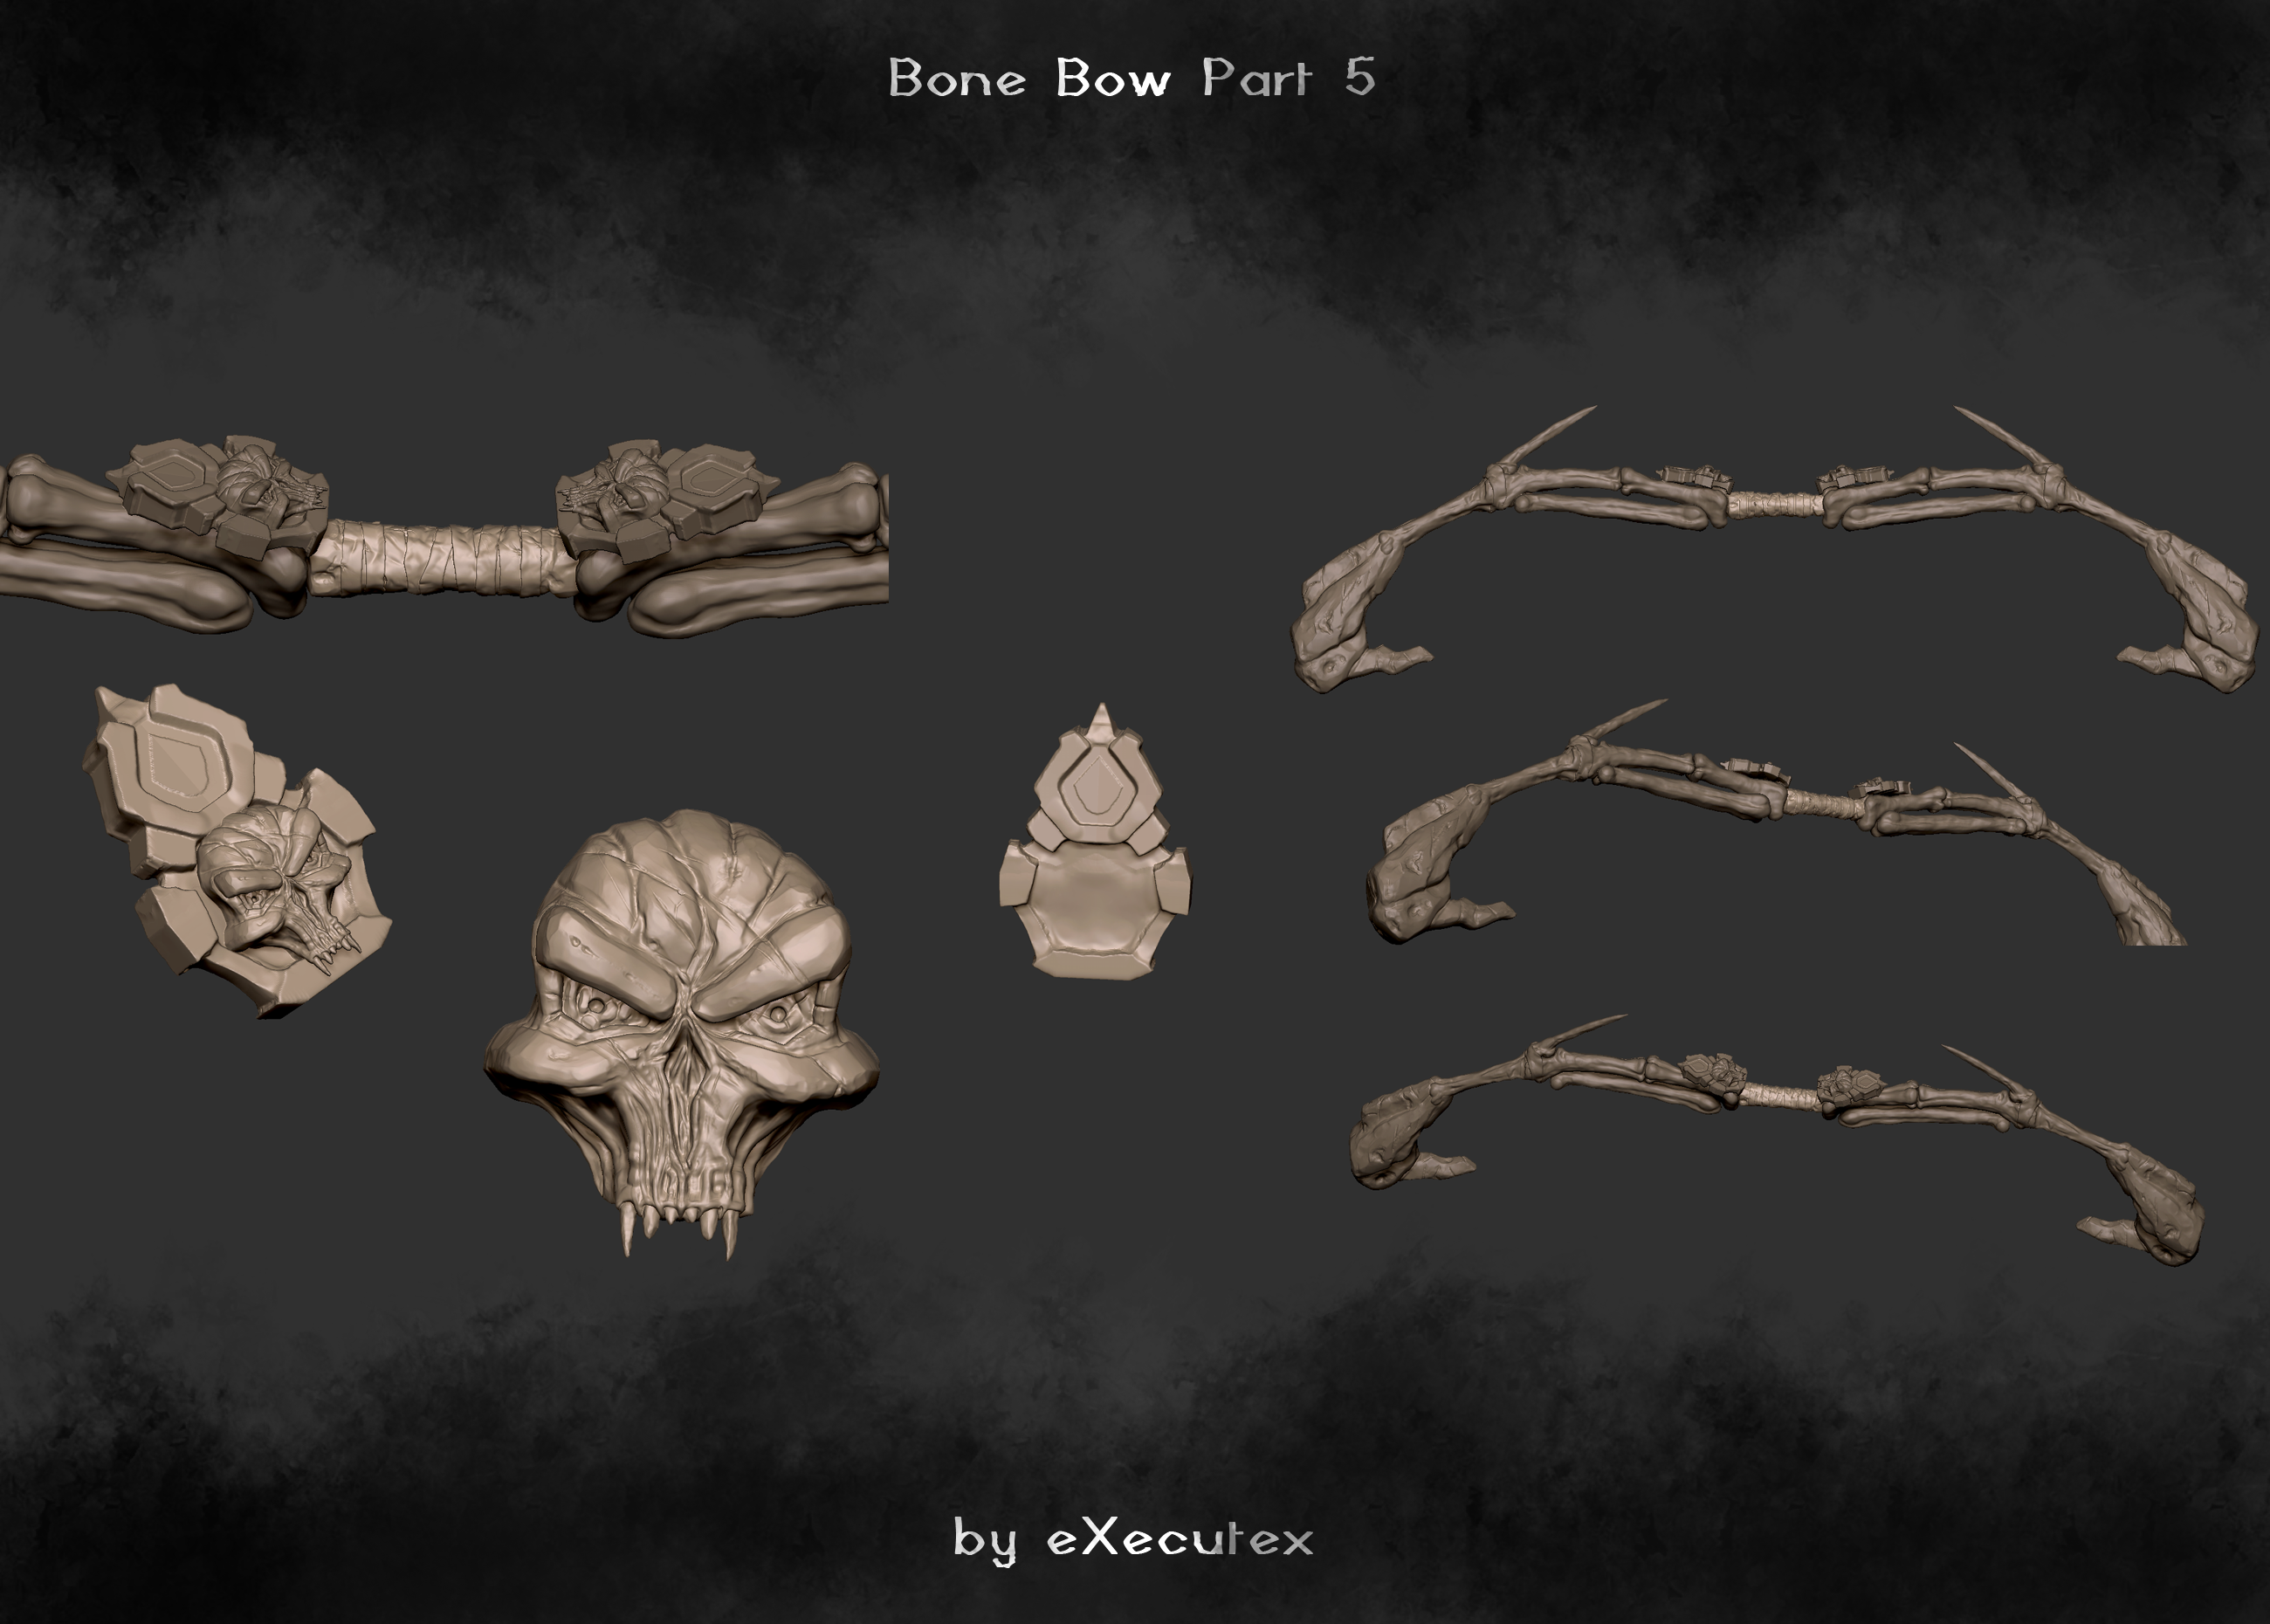 bone_bow_wip_5_by_executex-d5rq2yk.png